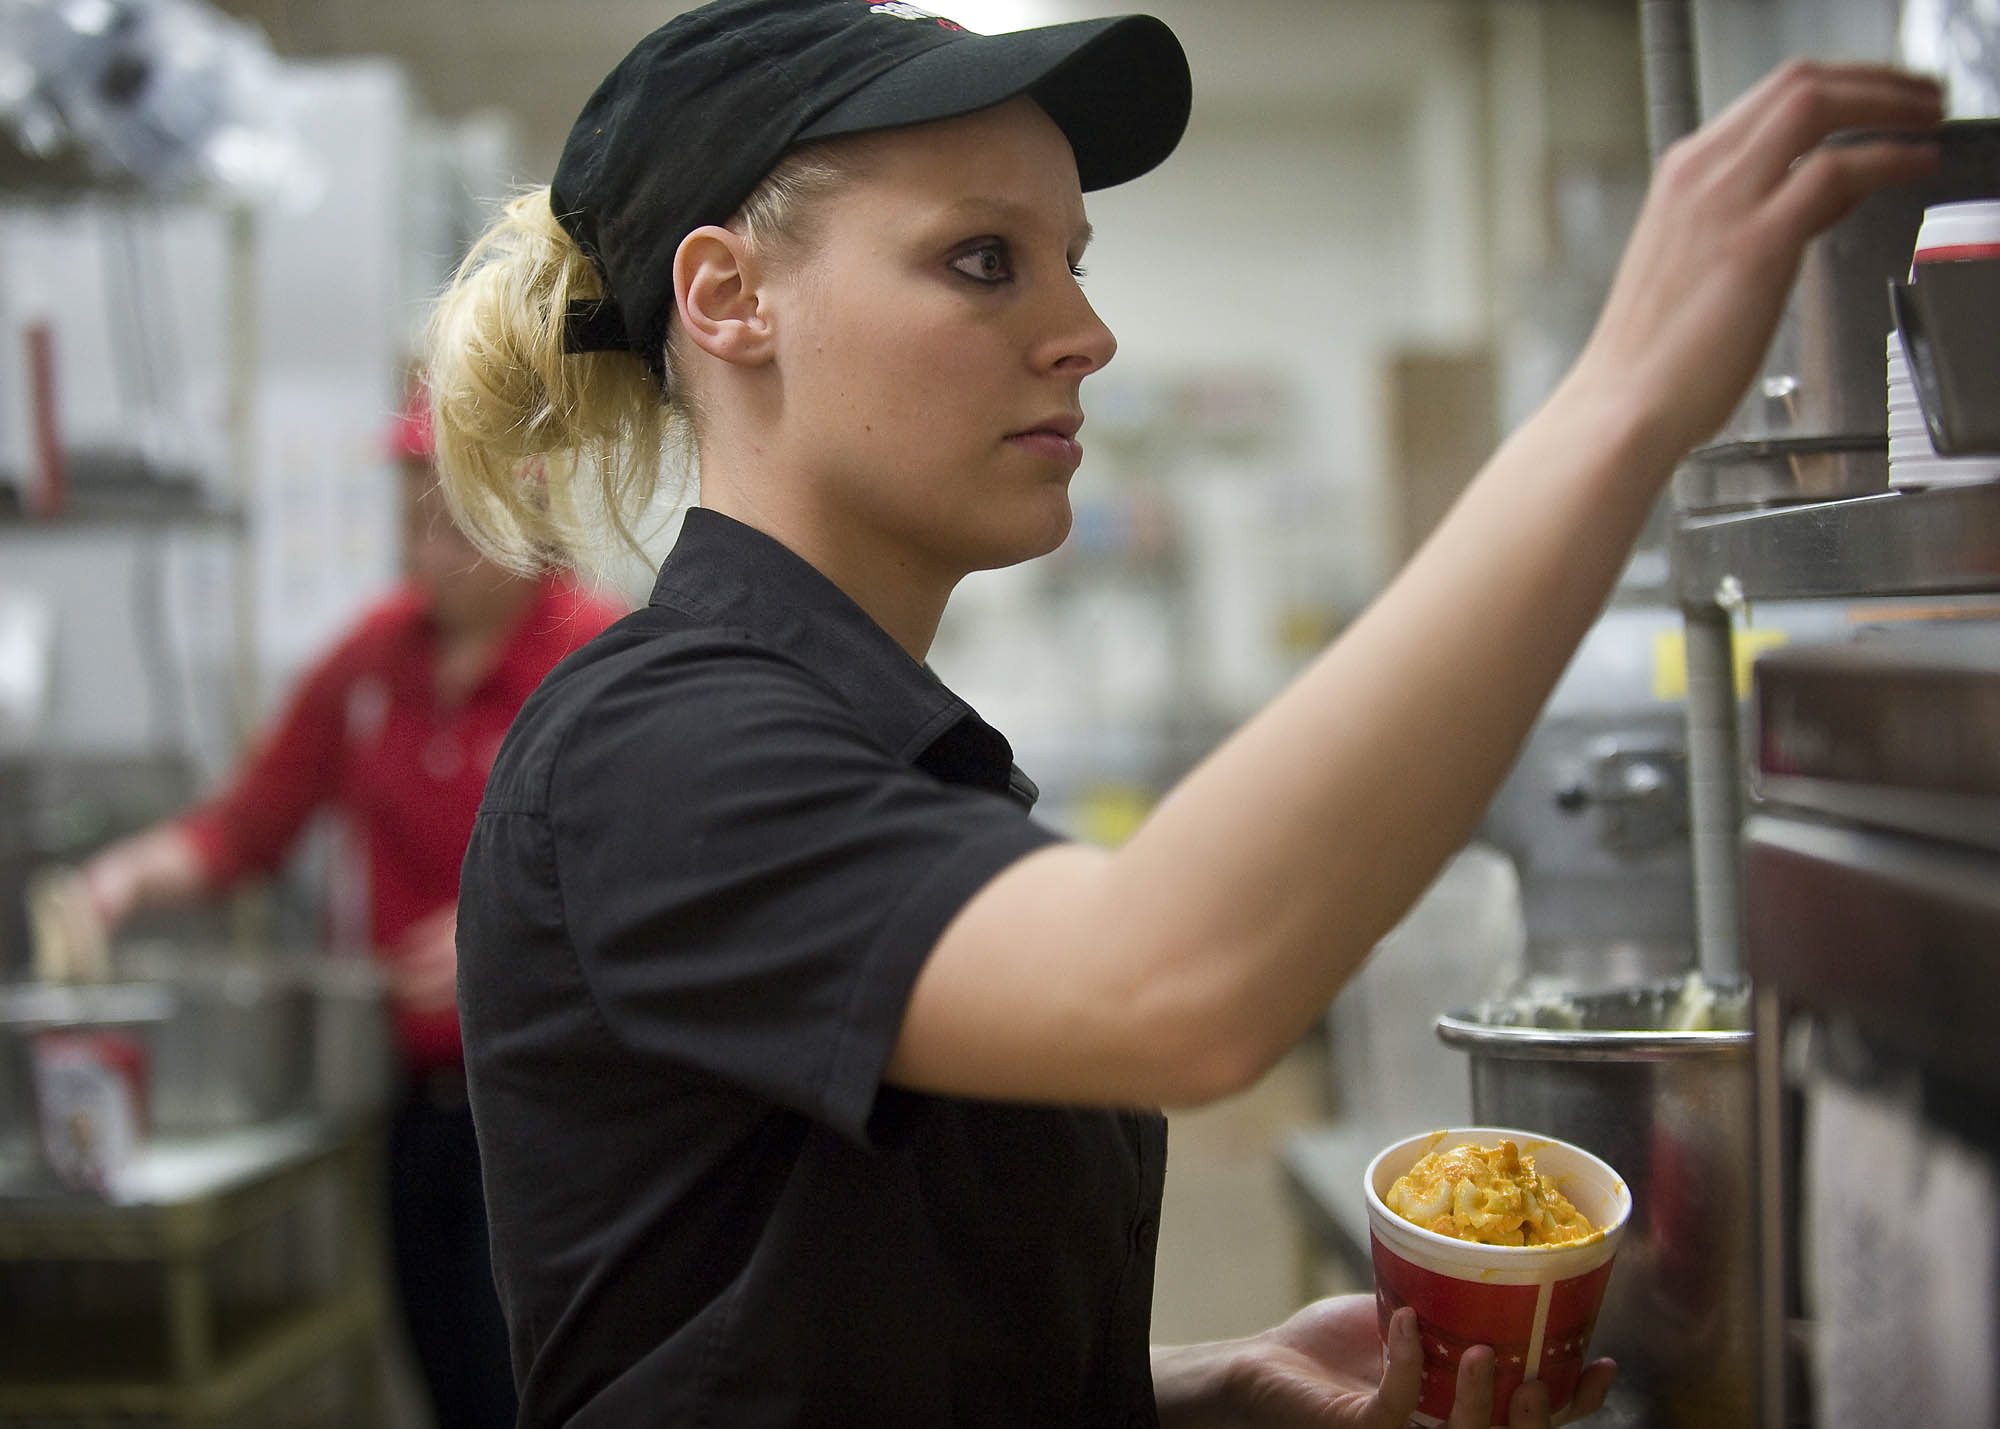 KFC employee Kristie Miles works at the fast-food restaurant in late 2011.